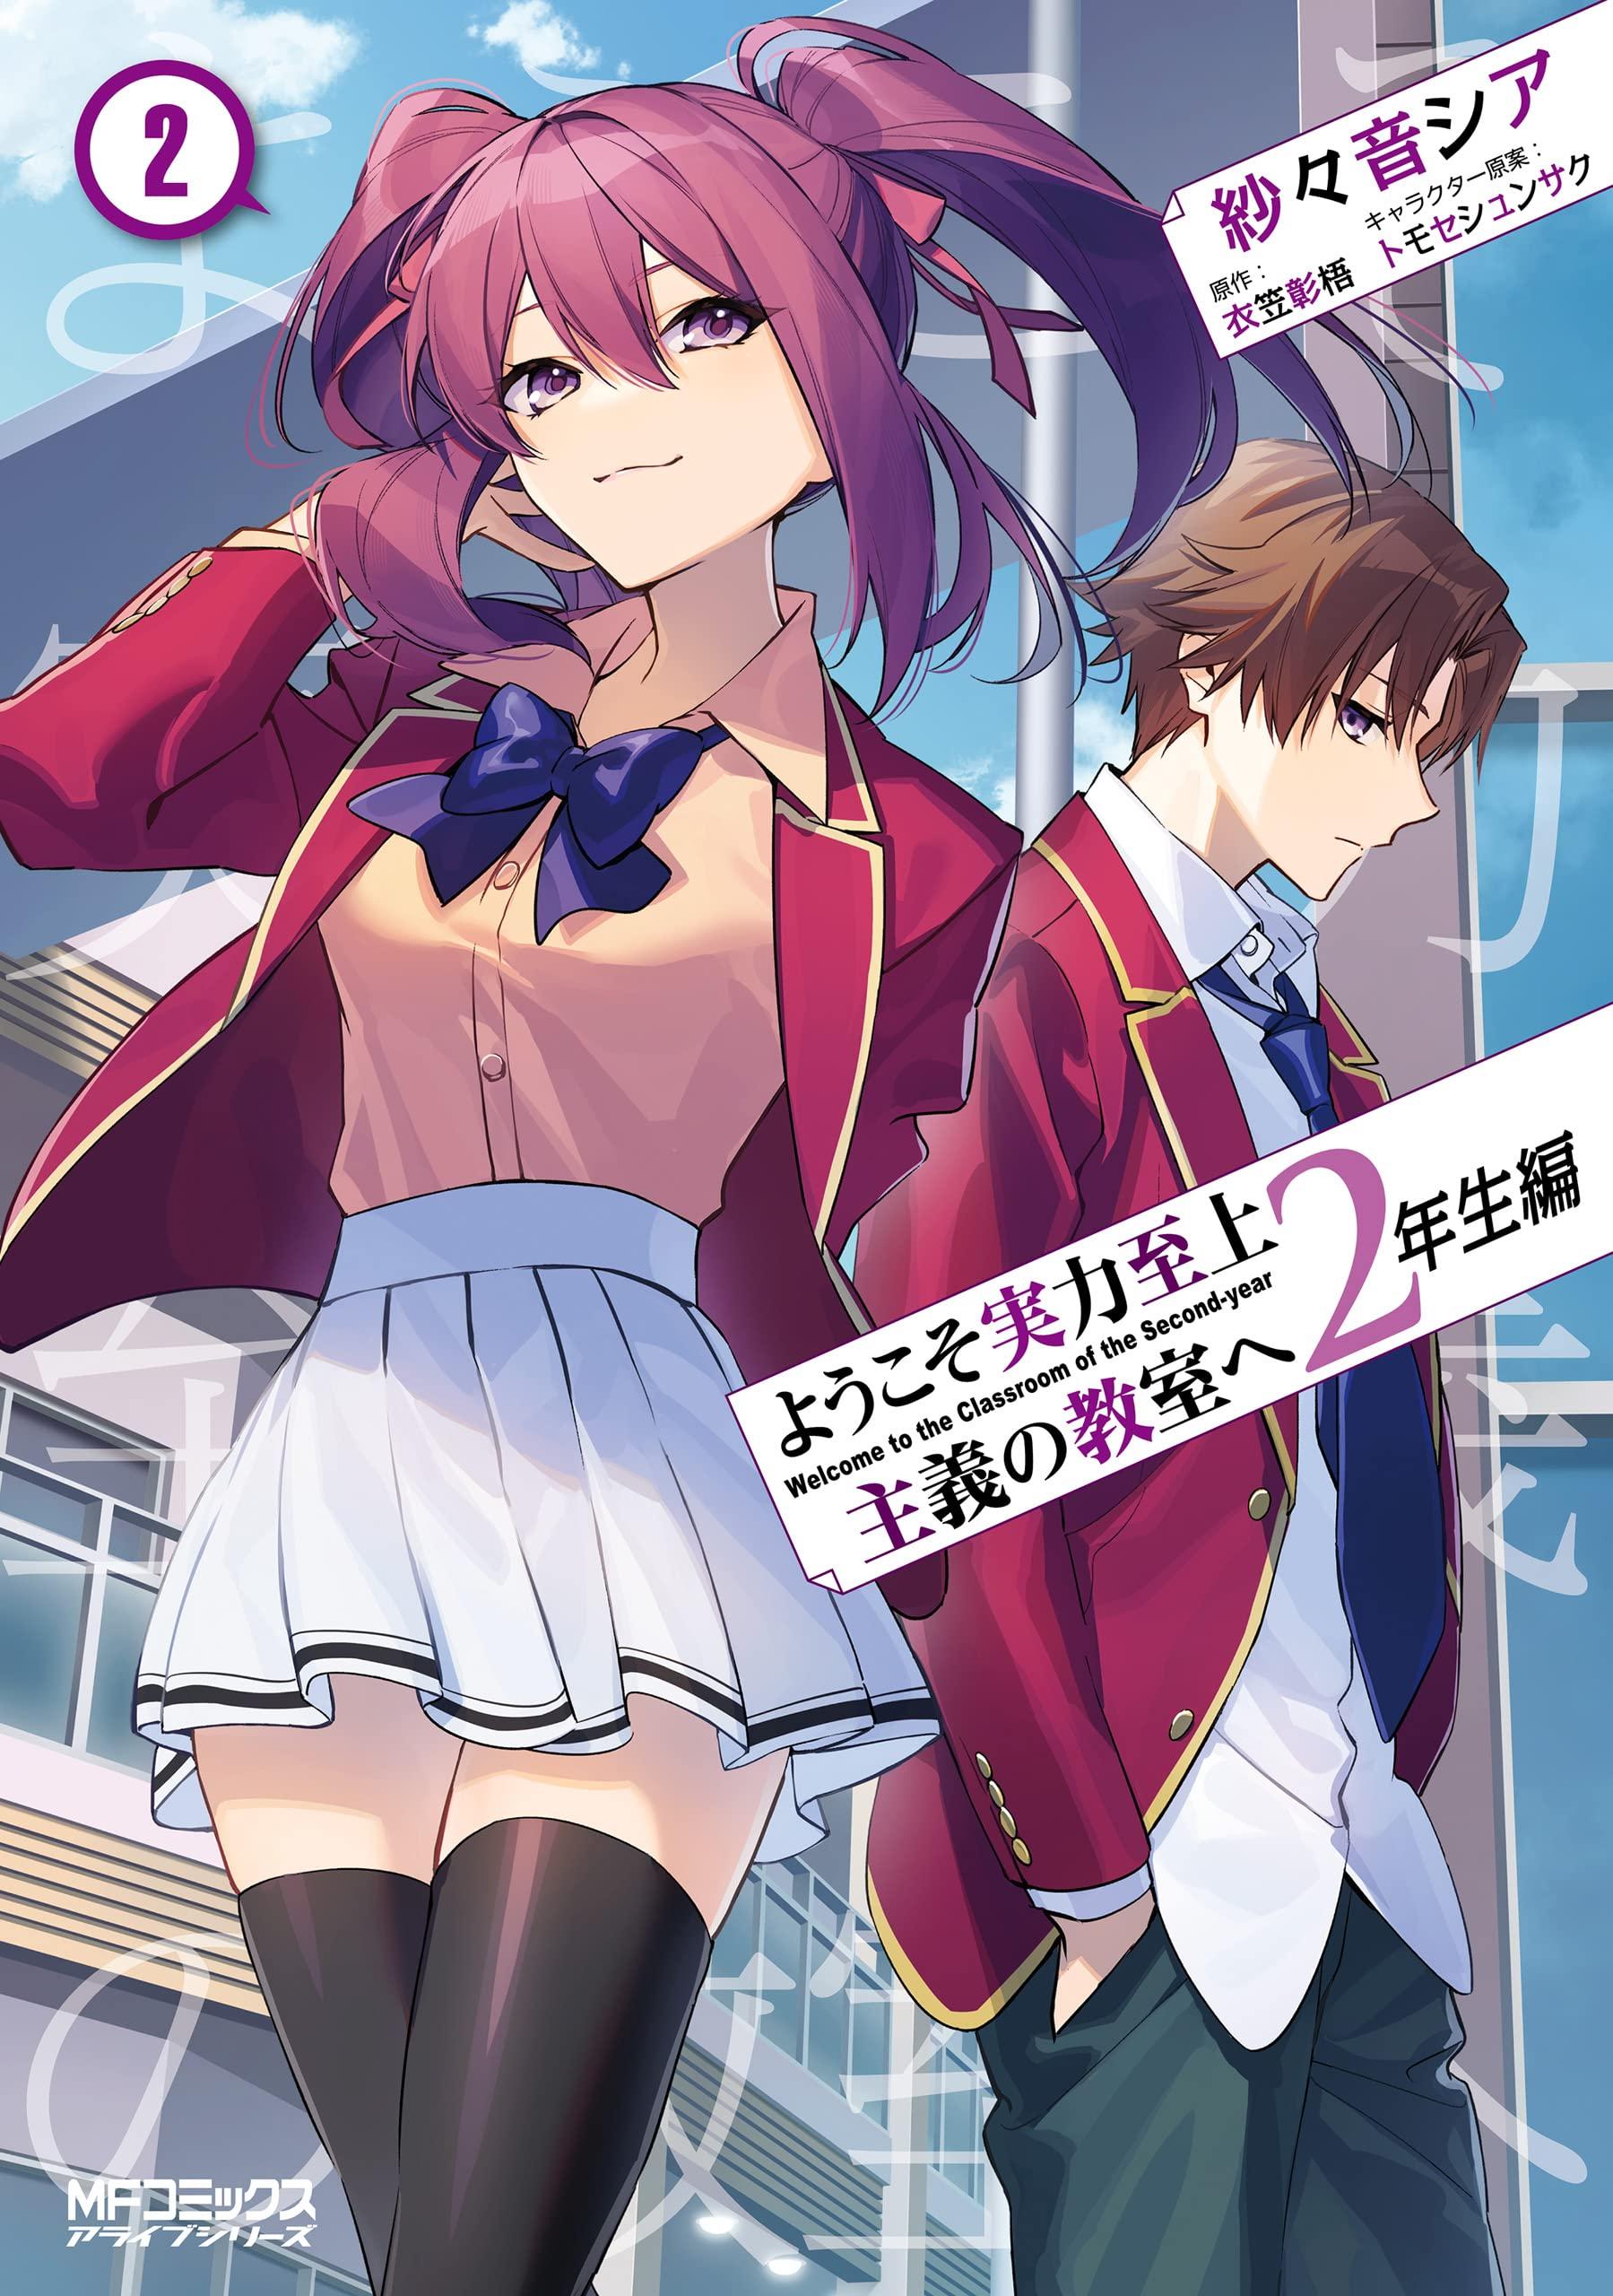 Classroom of the Elite - 2nd Year Arc cover image